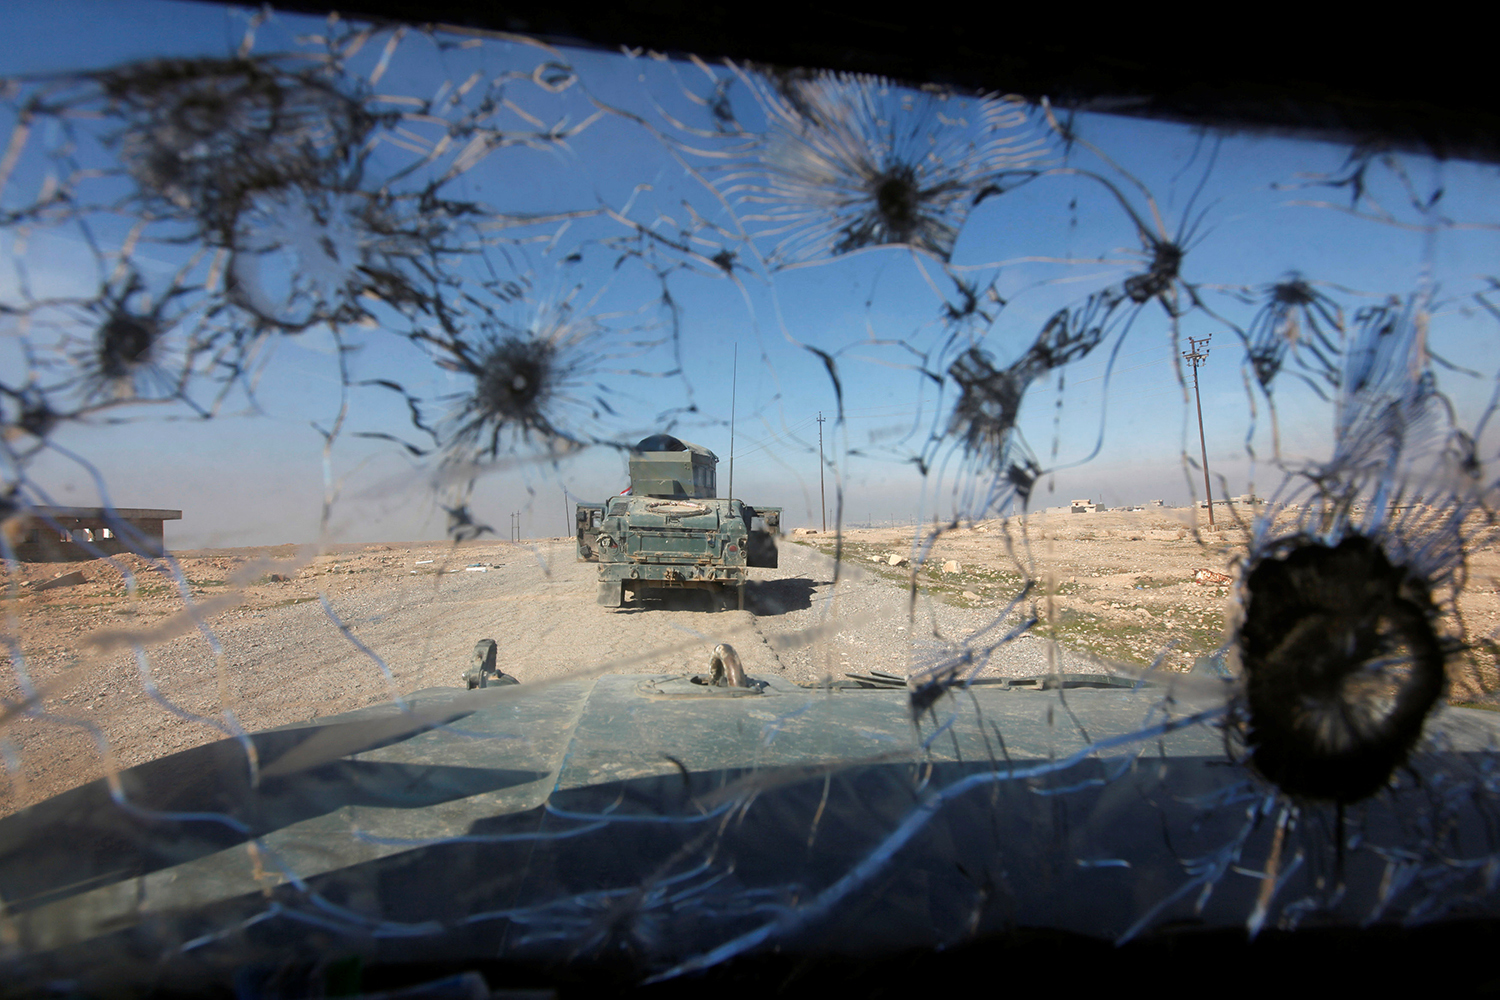 MOSUL 2017-02-20 Iraqi rapid response forces advancing towards south of Mosul are seen through a shattered glass window of a military vehicle, Iraq February 20, 2017. REUTERS/Alaa Al-Marjani TPX IMAGES OF THE DAY Photo: / REUTERS / TT / kod 72000